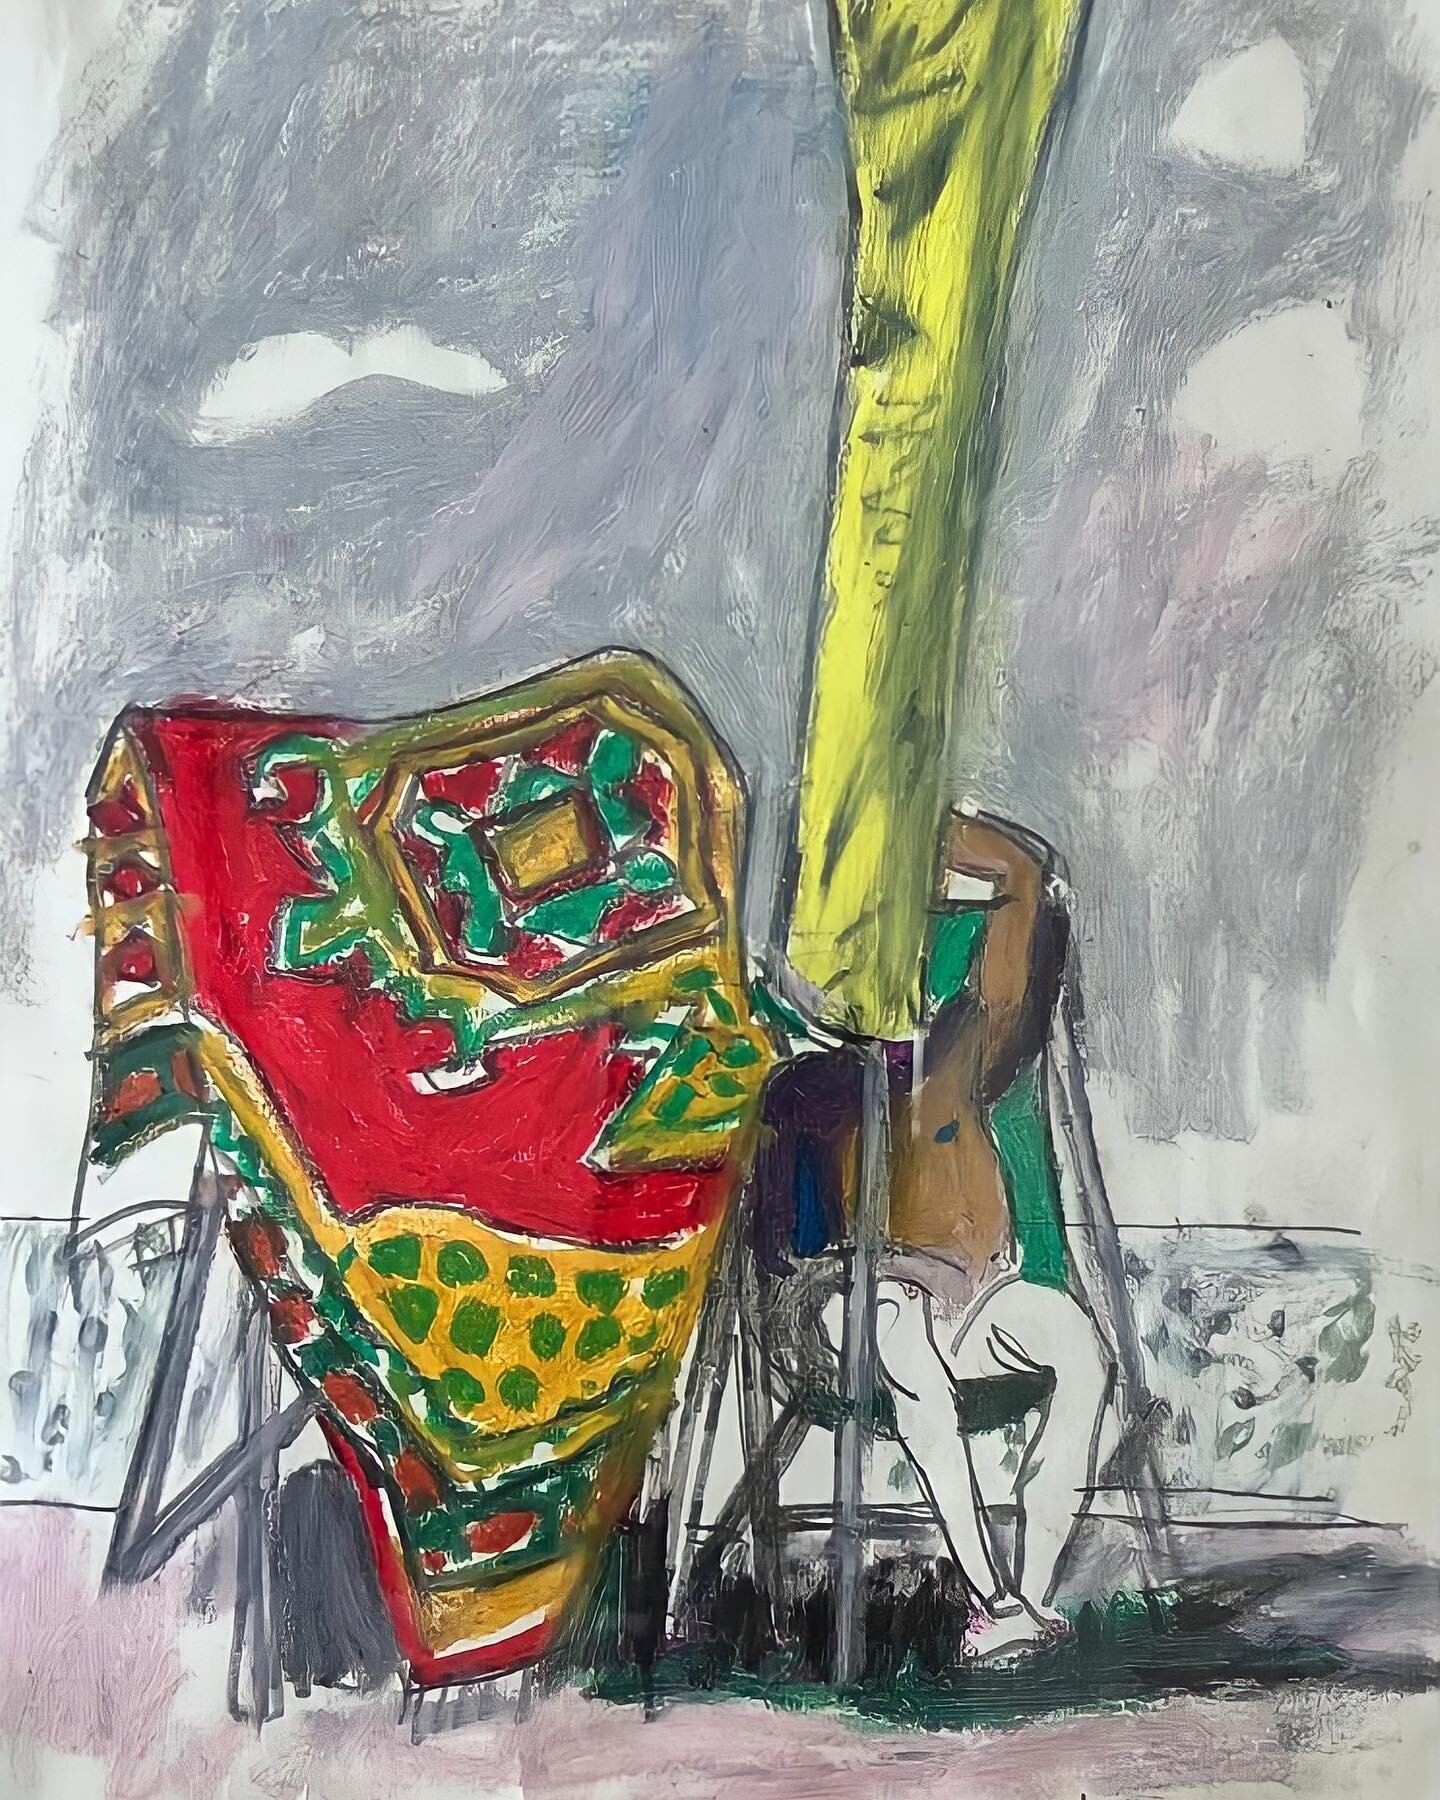 Alberto Morrocco&rsquo;s &lsquo;Algerian Rig Seller&rsquo; featuring in our latest exhibition &lsquo;From Phillip to Philipson : A Collection of Scottish Masters&rsquo; launching next week at The Dundas Street Gallery in Edinburgh. The exhibition is 